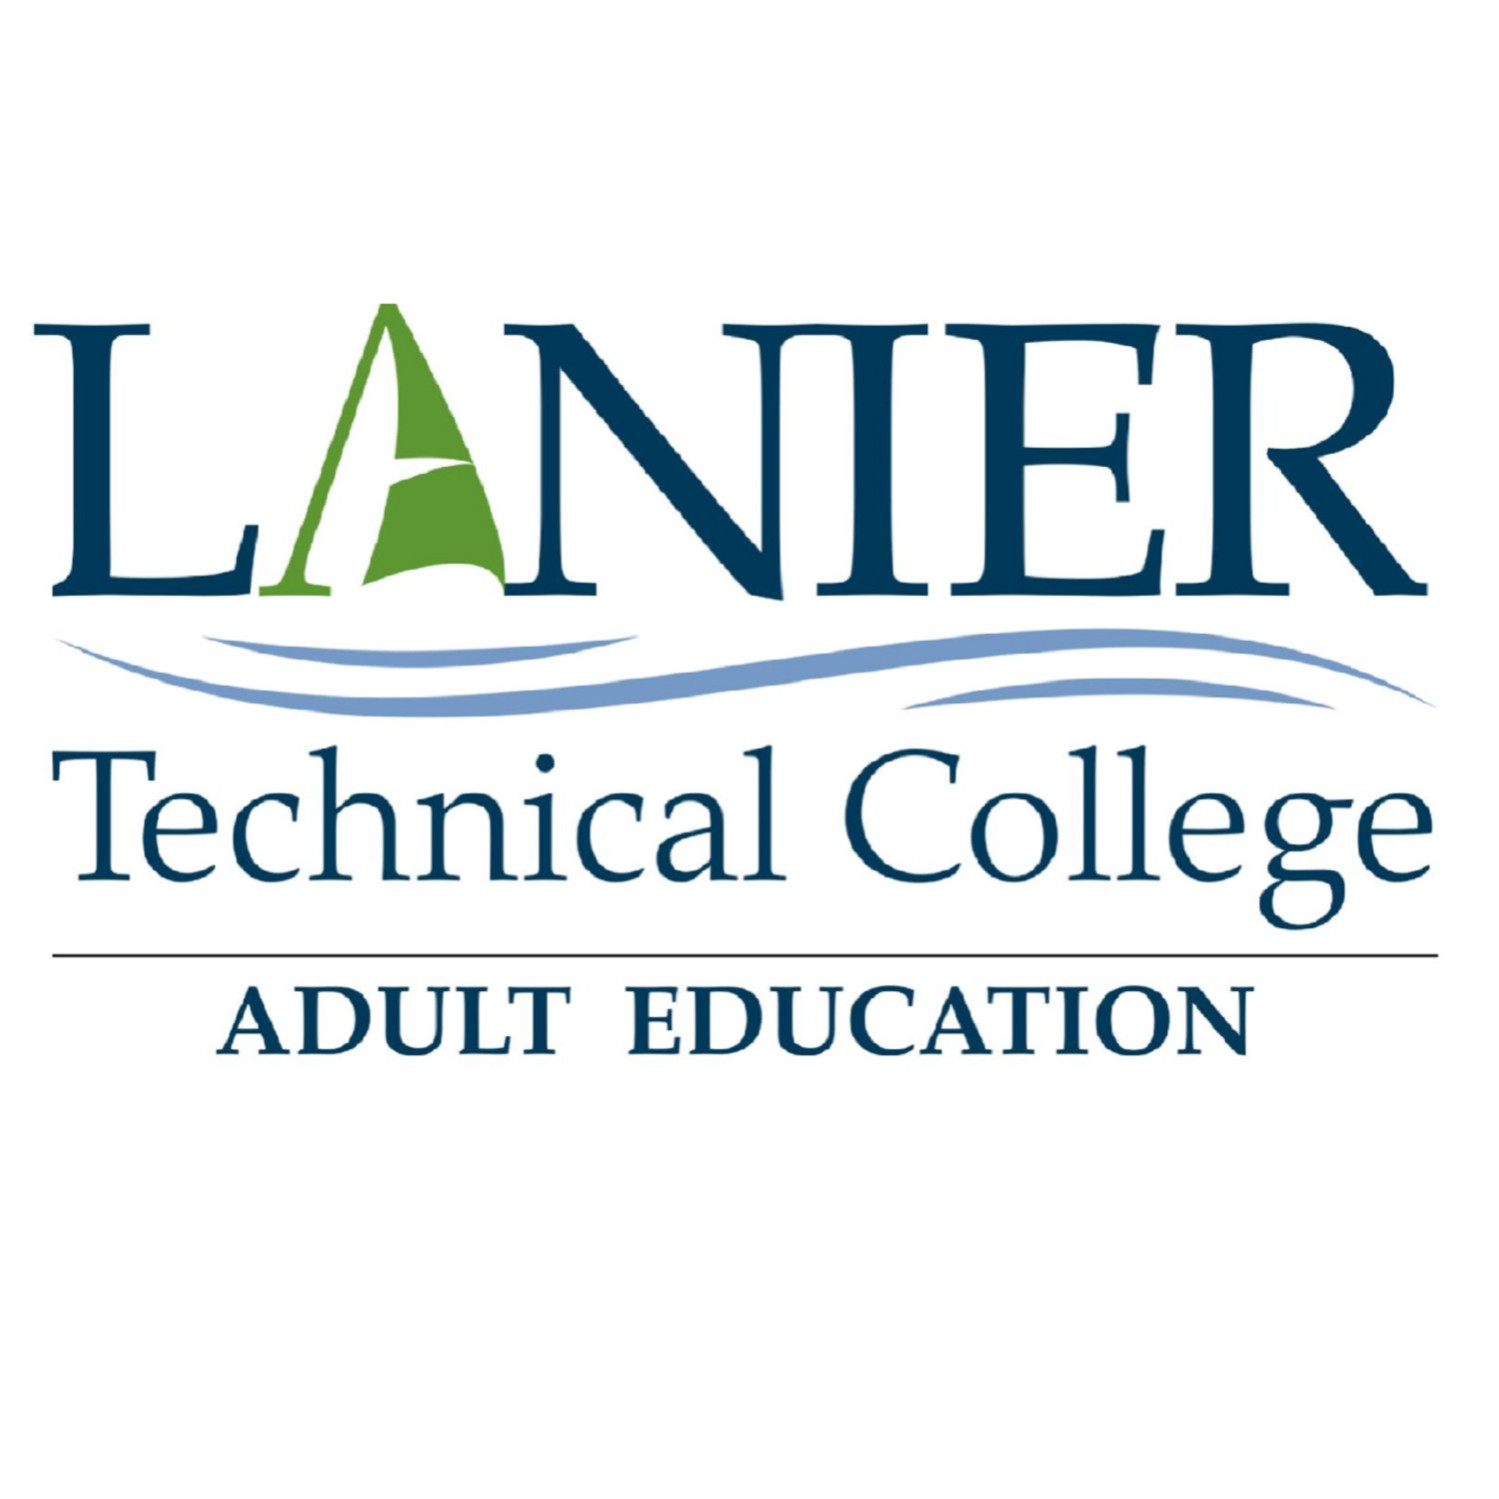 Lanier Technical College Adult Education